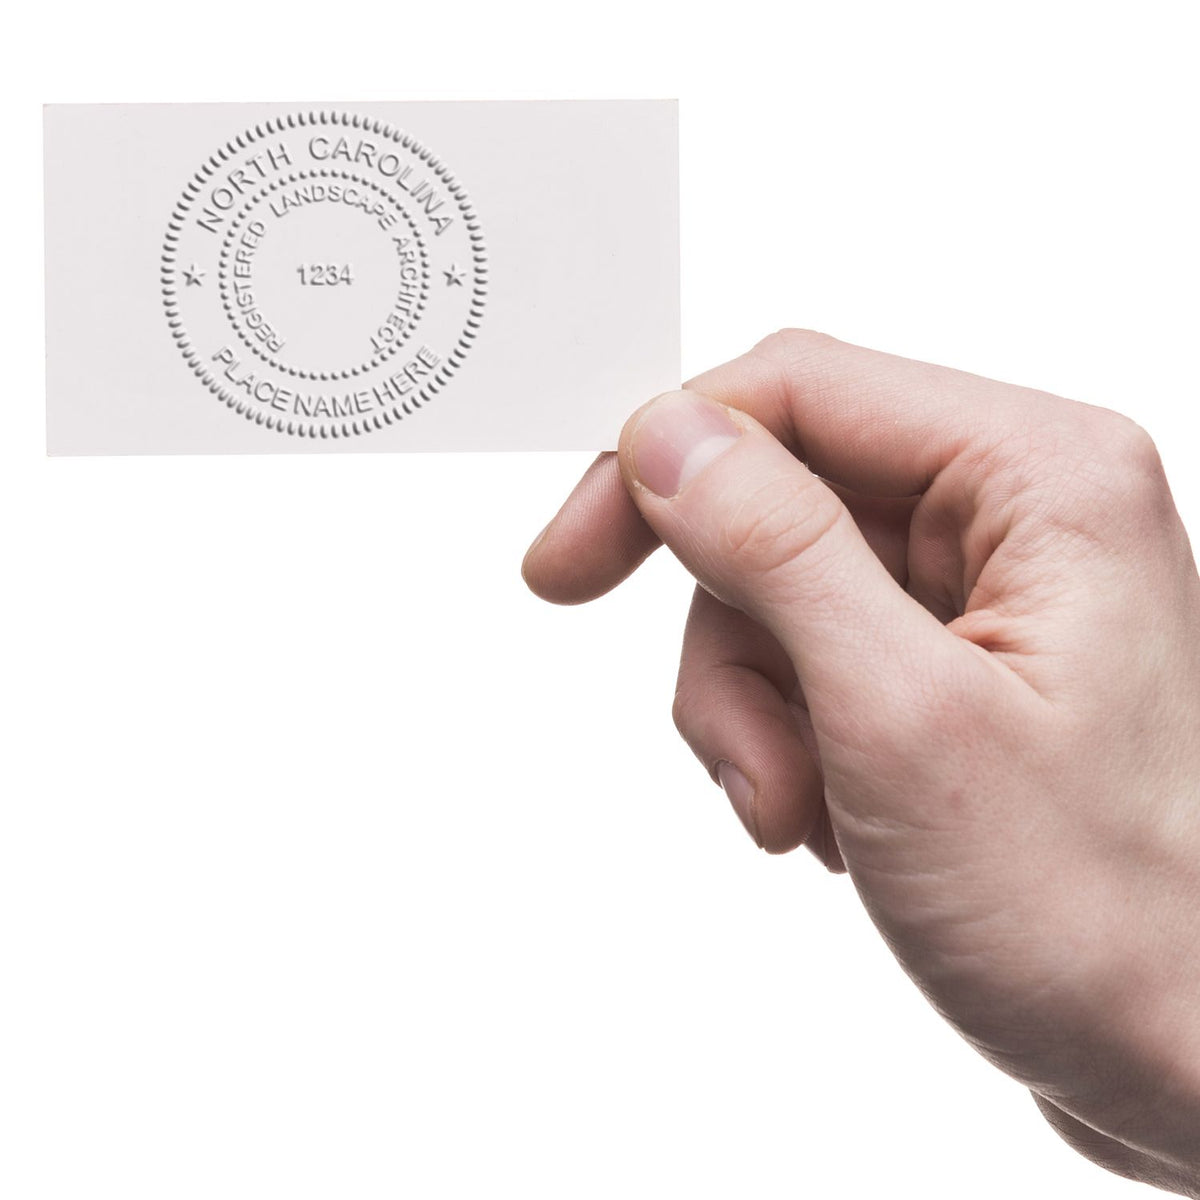 An alternative view of the Hybrid North Carolina Landscape Architect Seal stamped on a sheet of paper showing the image in use